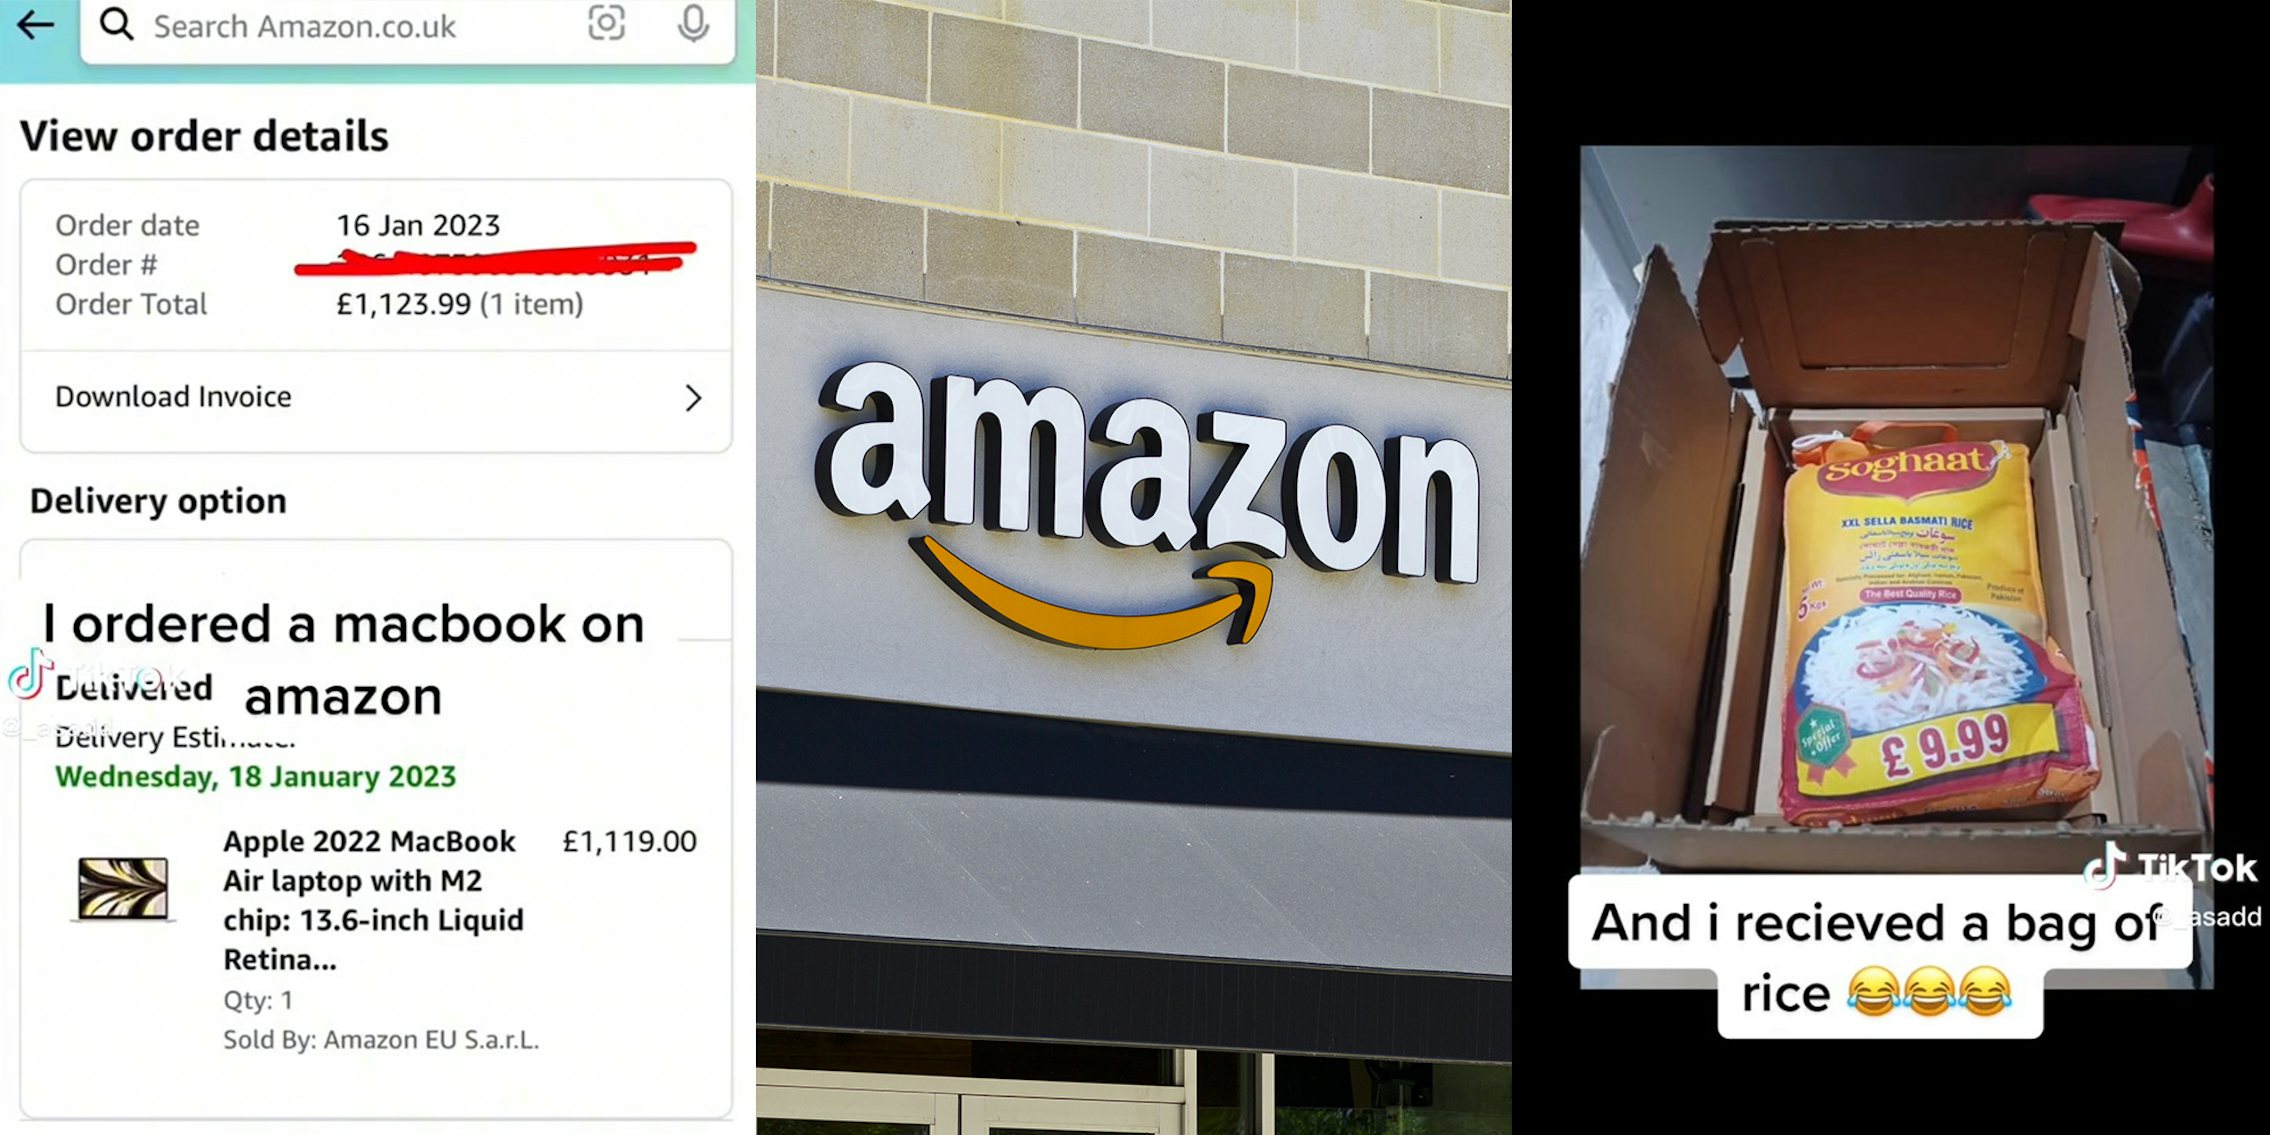 Customer orders Macbook on Amazon, receives a bag of rice instead